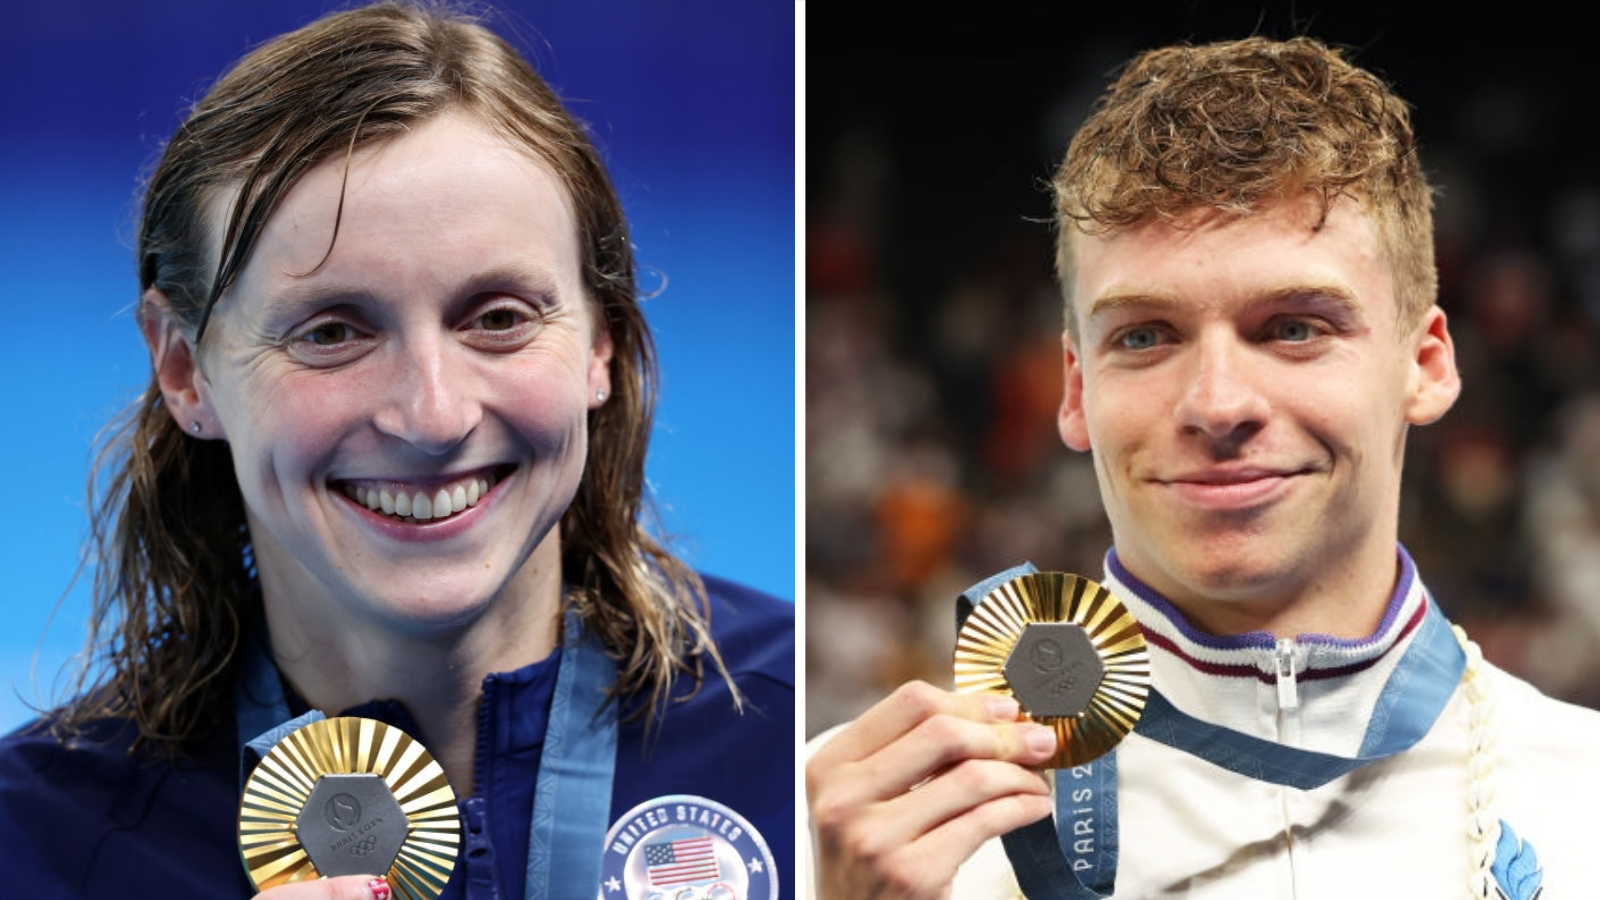 Ledecky & Marchand make history on epic night in the pool